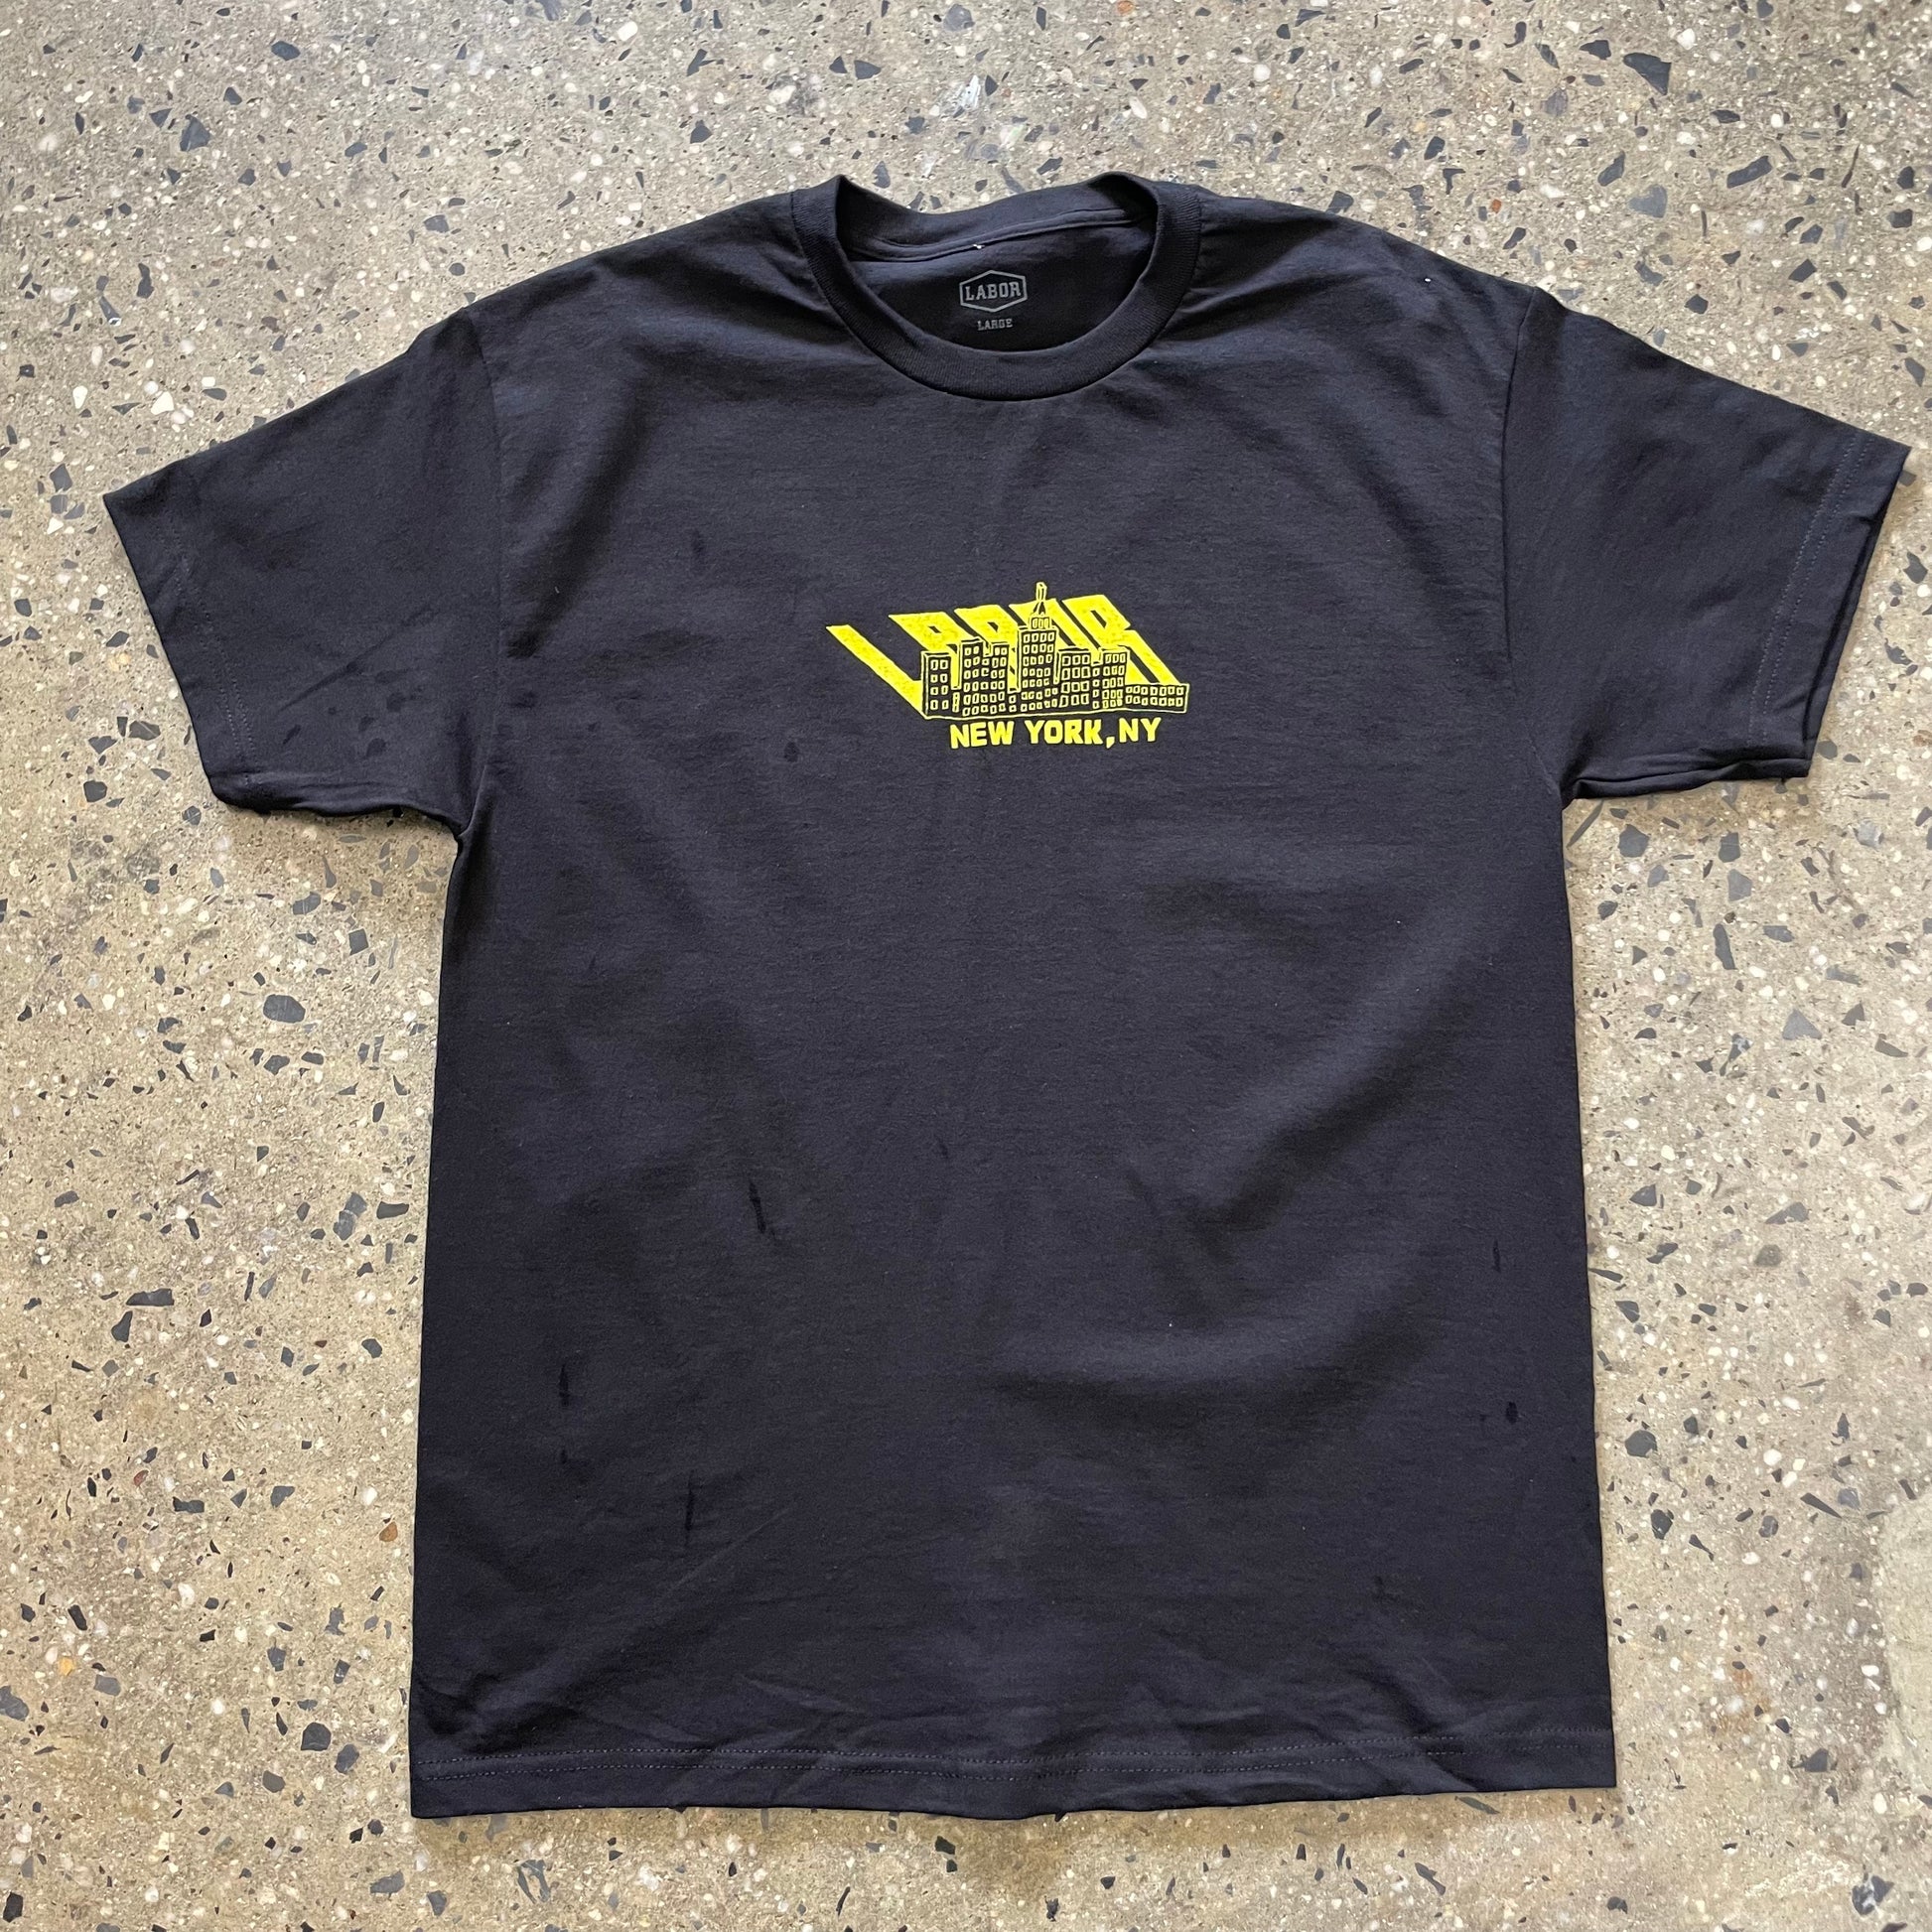 yellow labor cityscape logo printed in center chest of black t-shirt